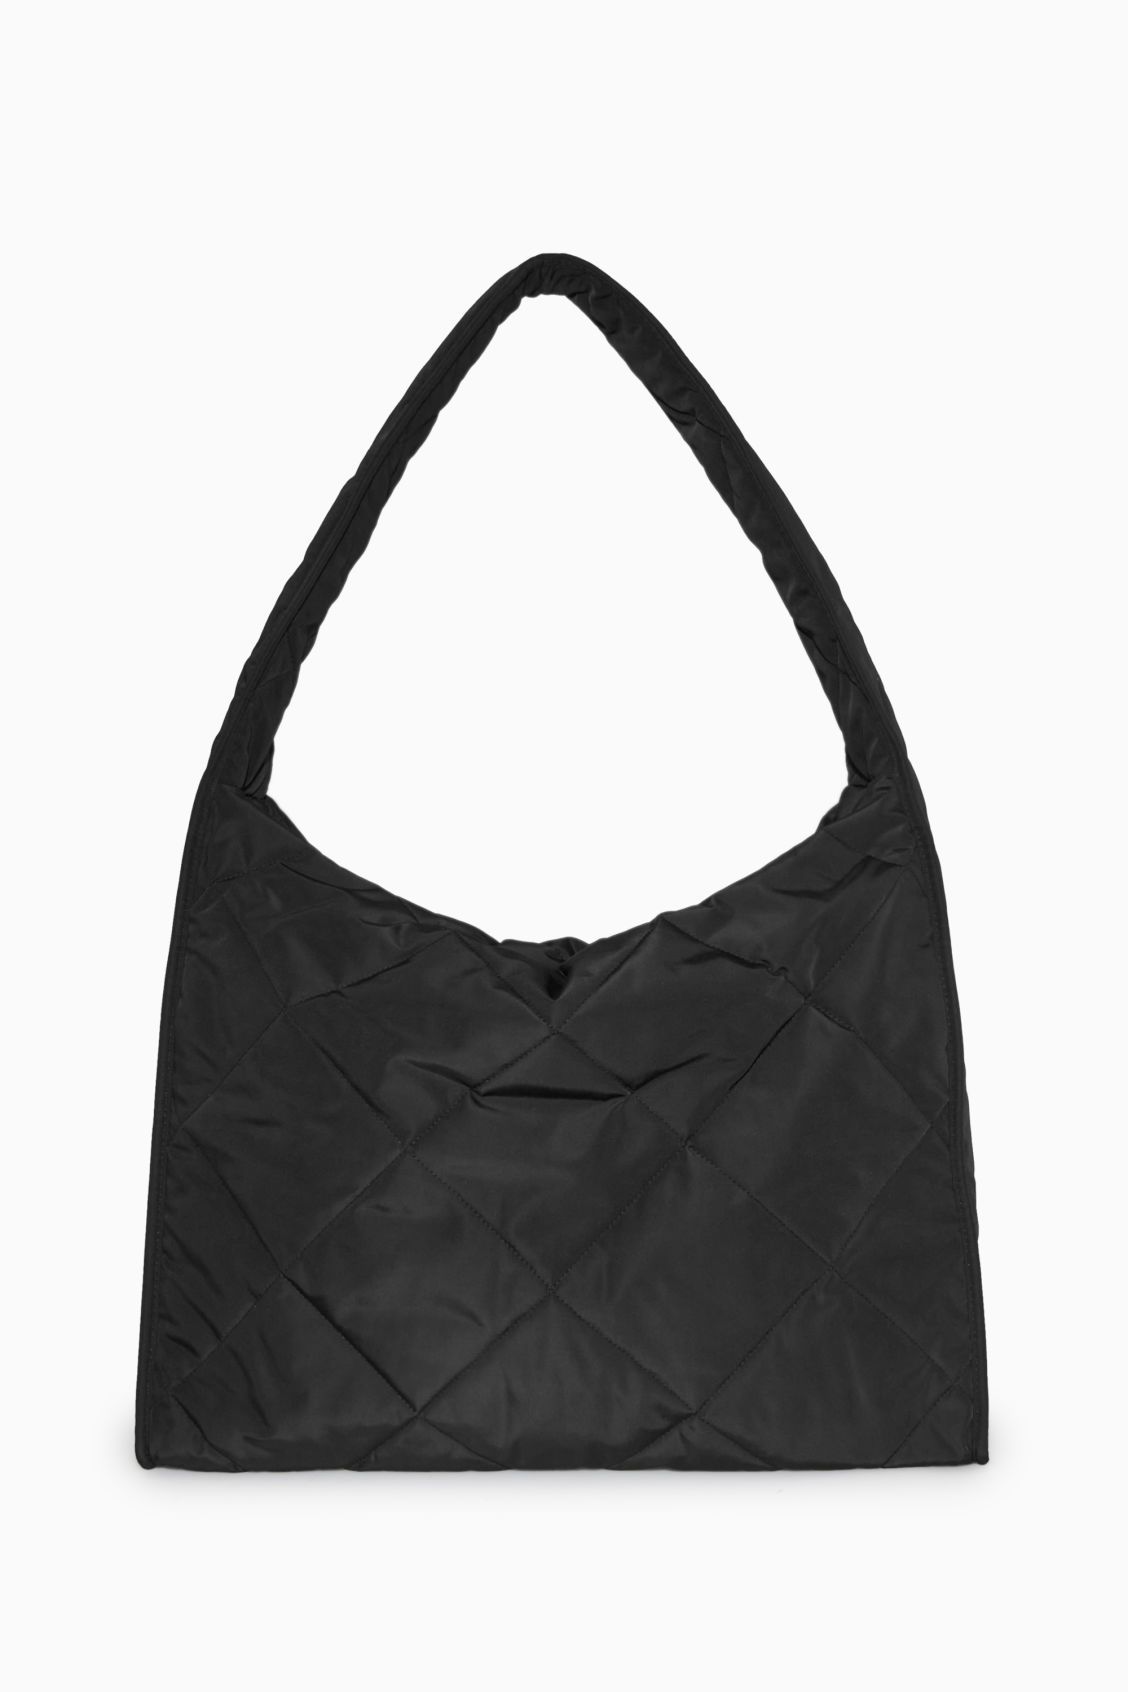 OVERSIZED DIAMOND-QUILTED BAG | COS UK